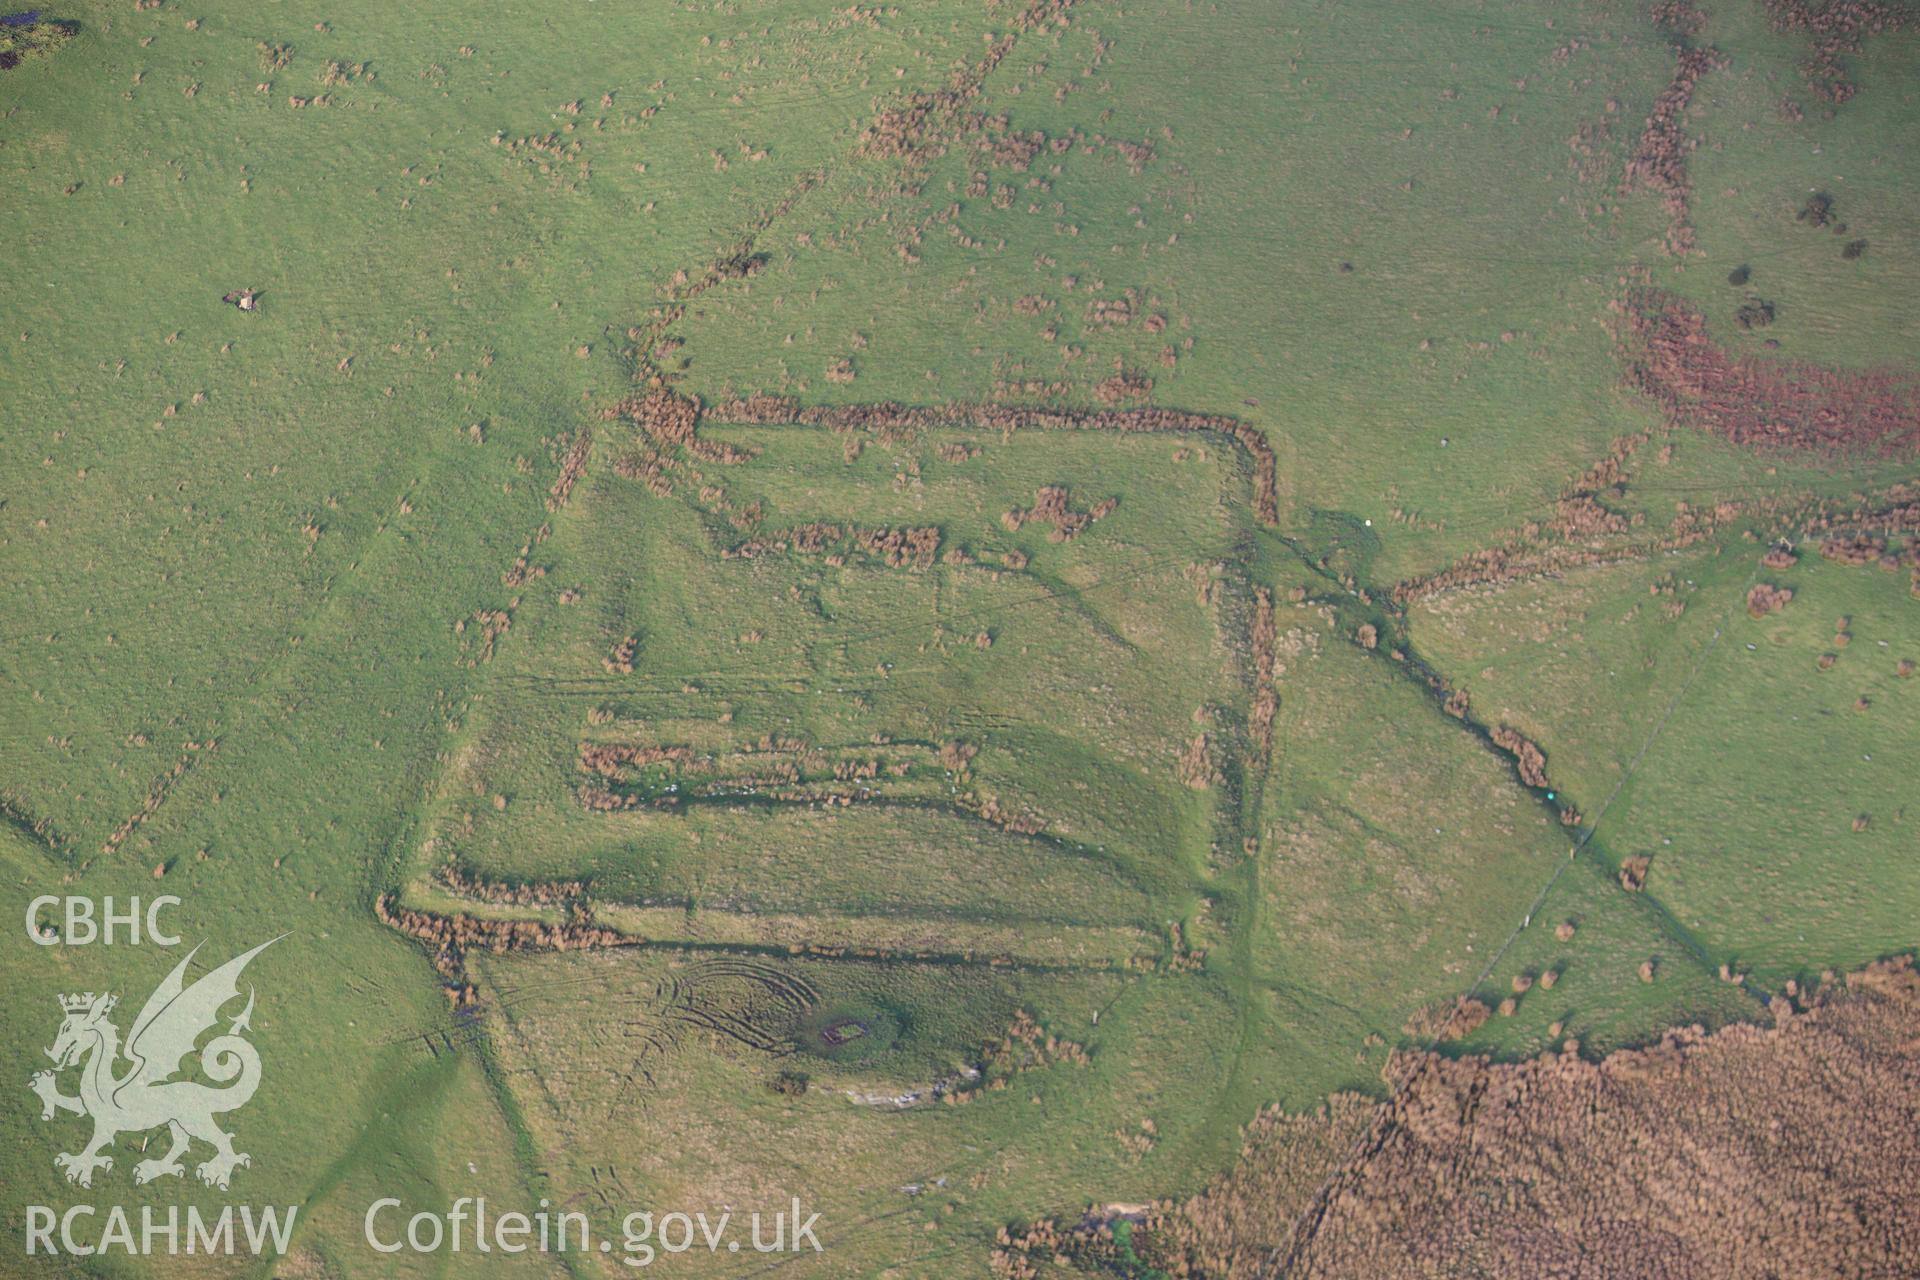 RCAHMW colour oblique aerial photograph of Hen Ddinbych. Taken on 10 December 2009 by Toby Driver